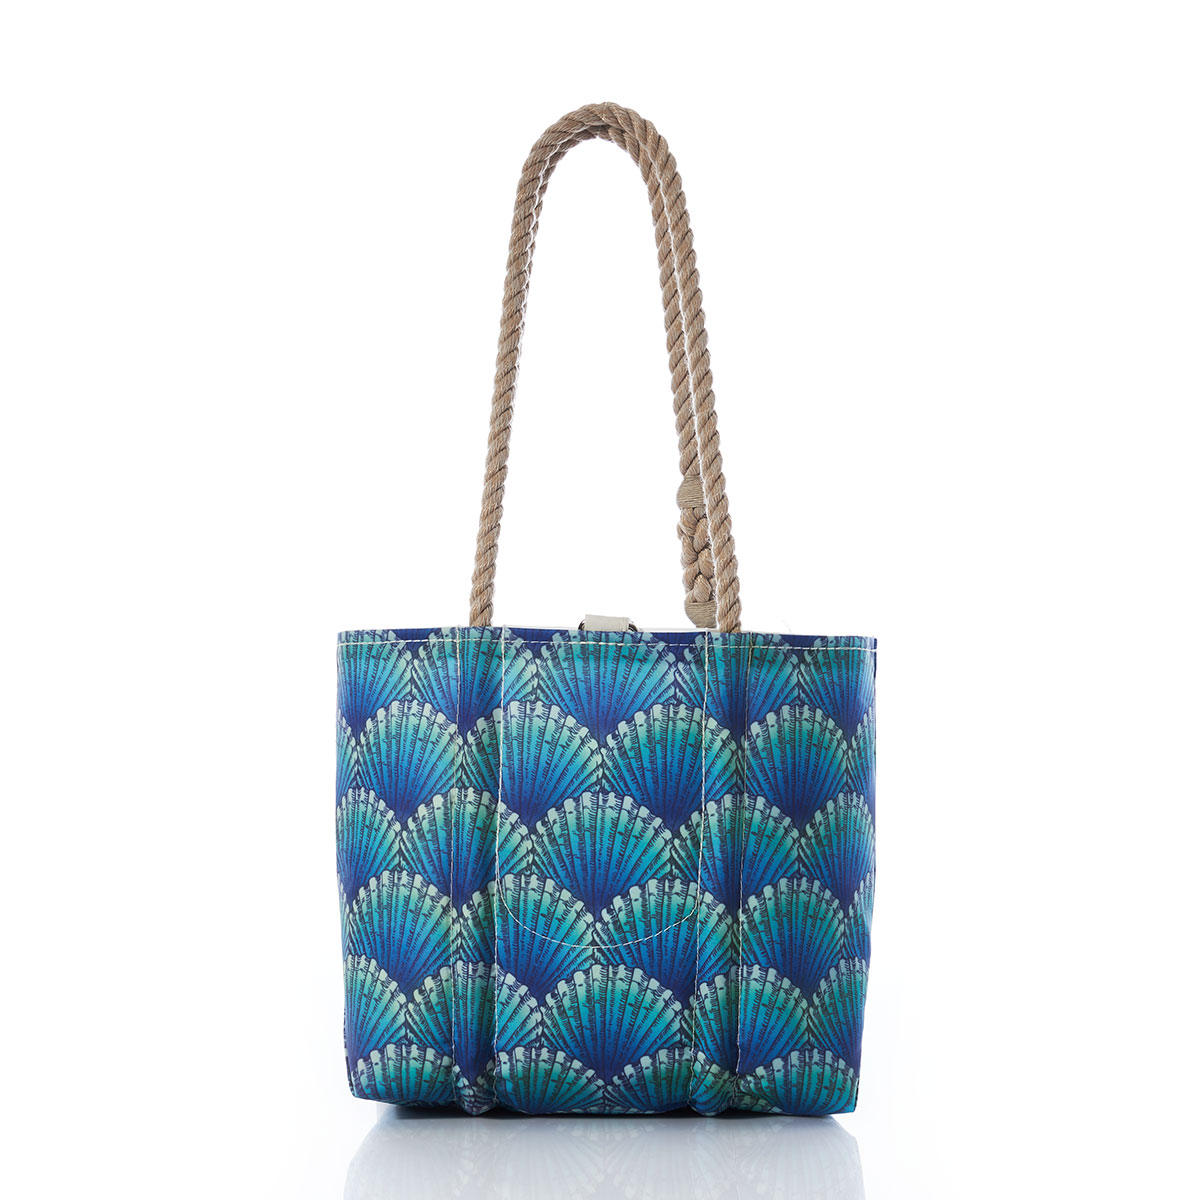 back view of a recycled sail cloth handbag with hemp rope handles is printed with a repeating pattern of blue scallop shells